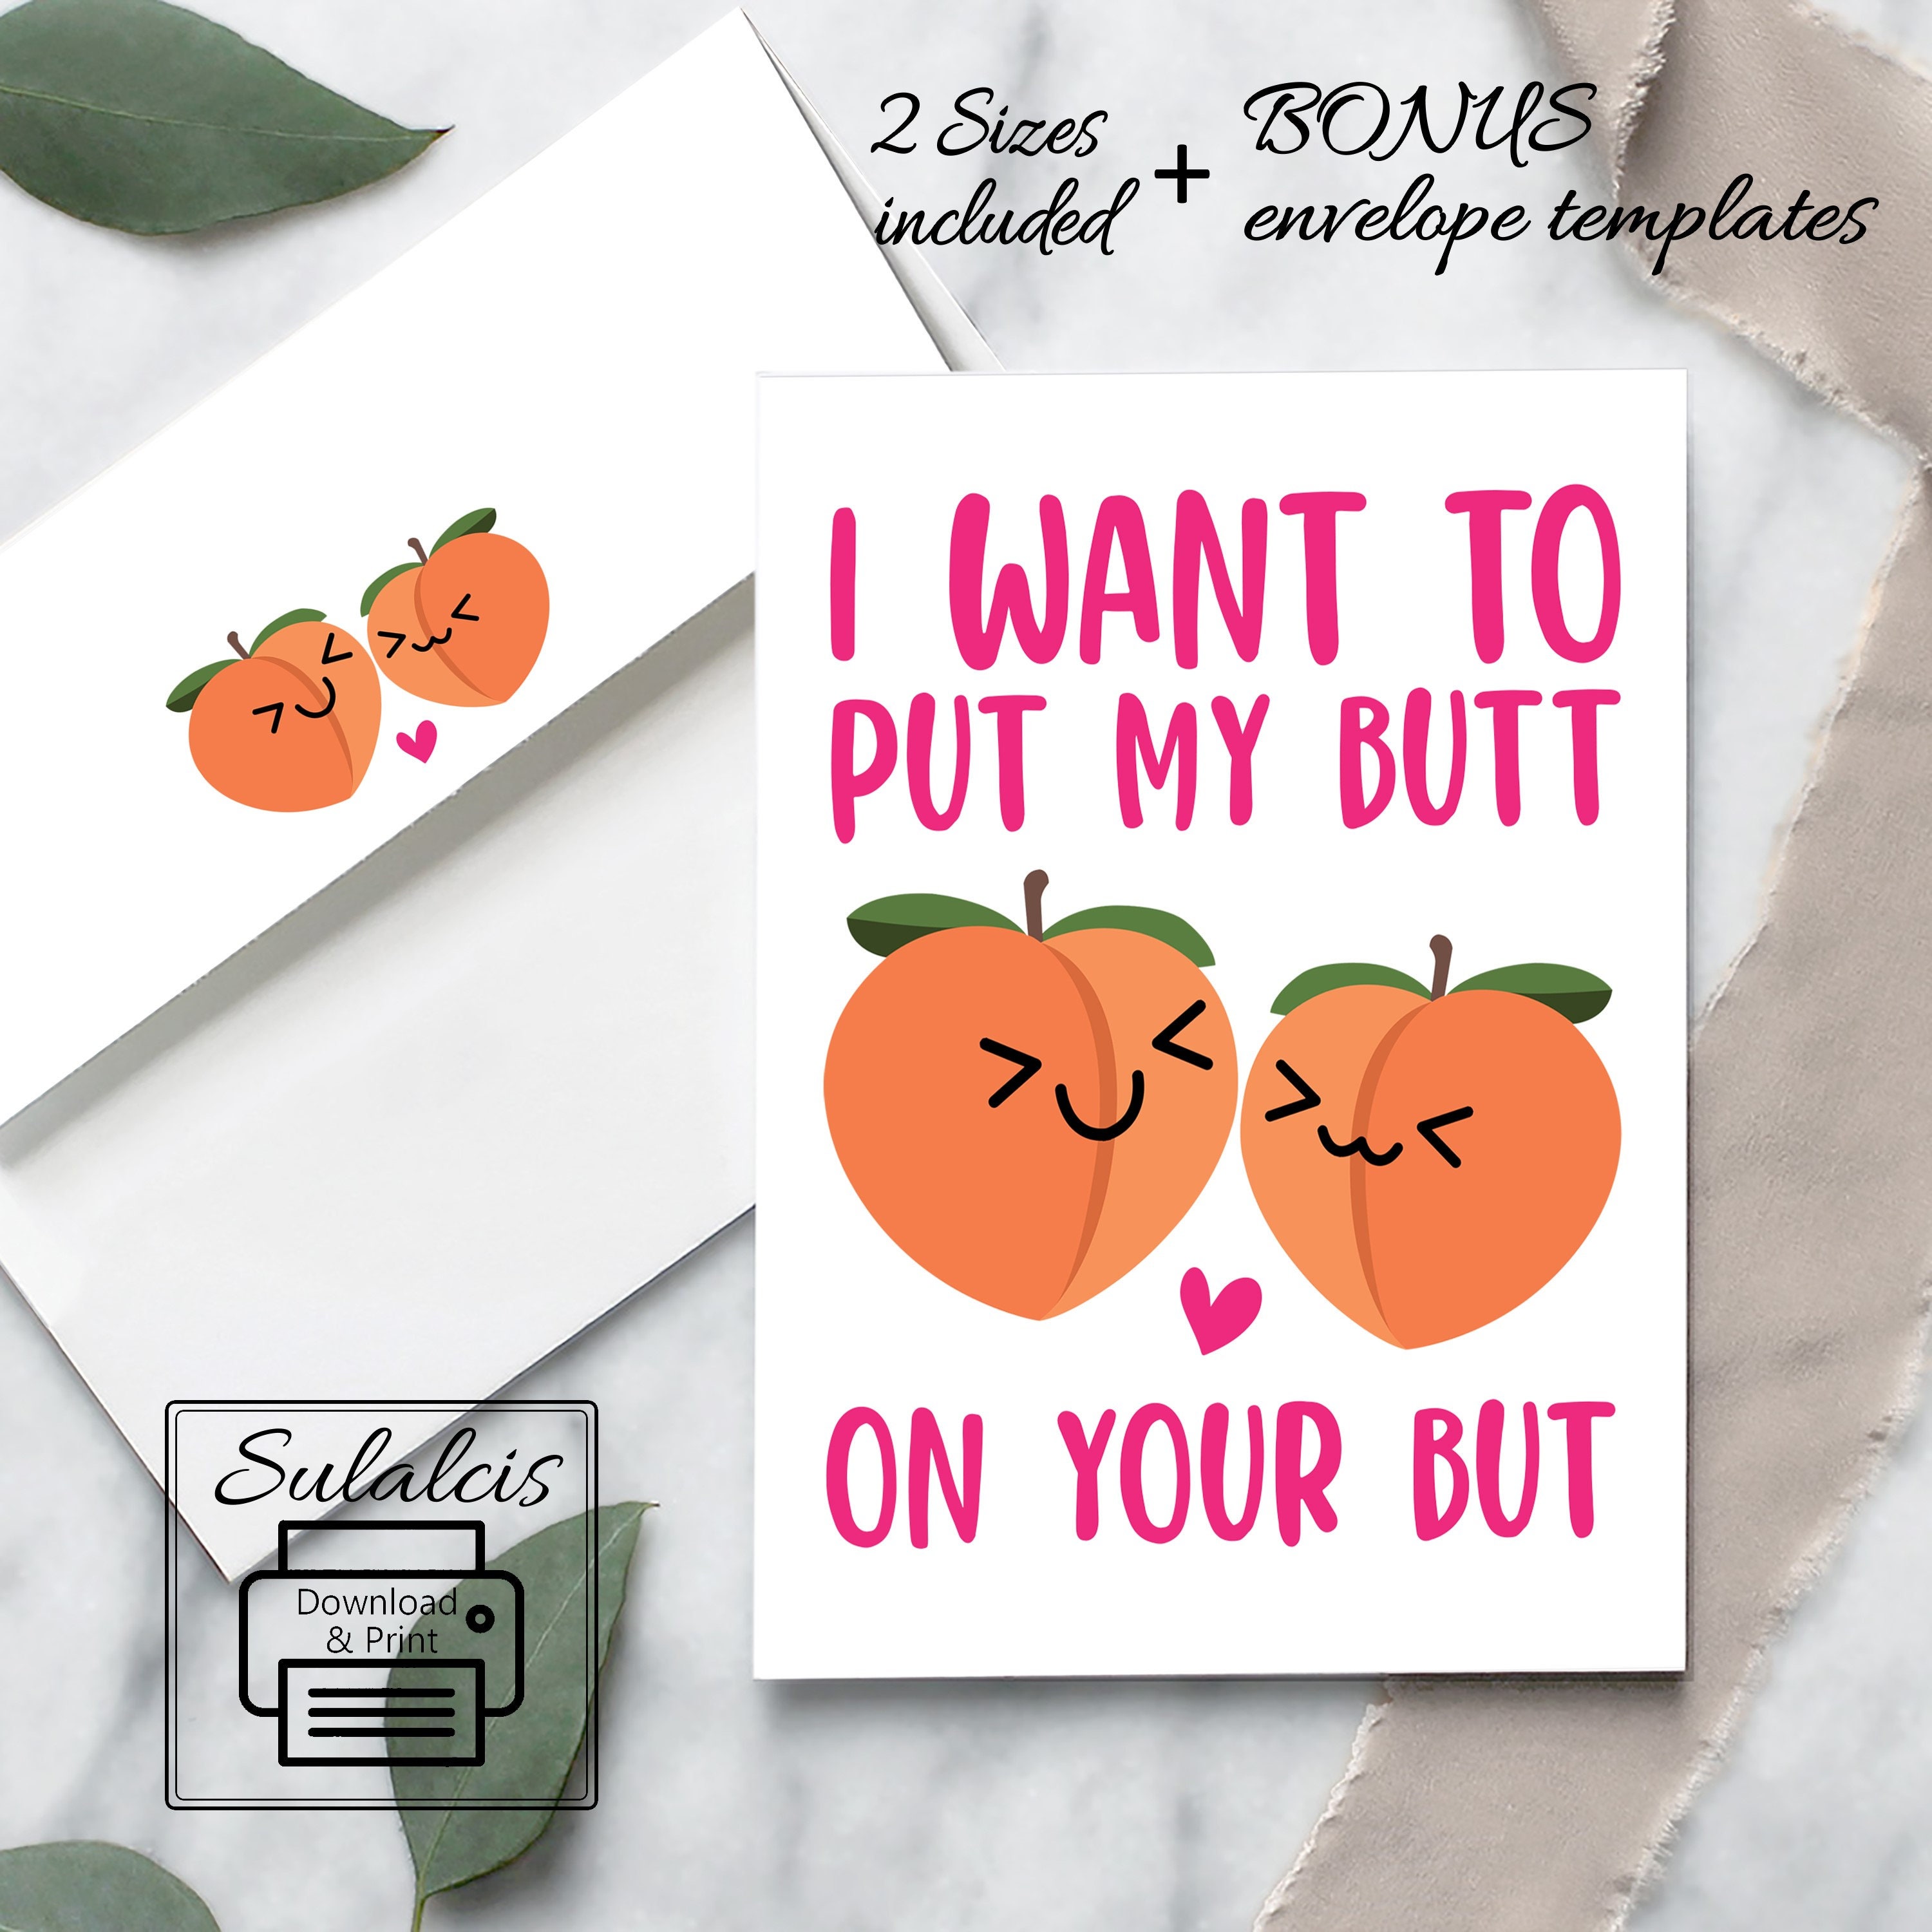 cathy mccleary recommends put in my butt pic